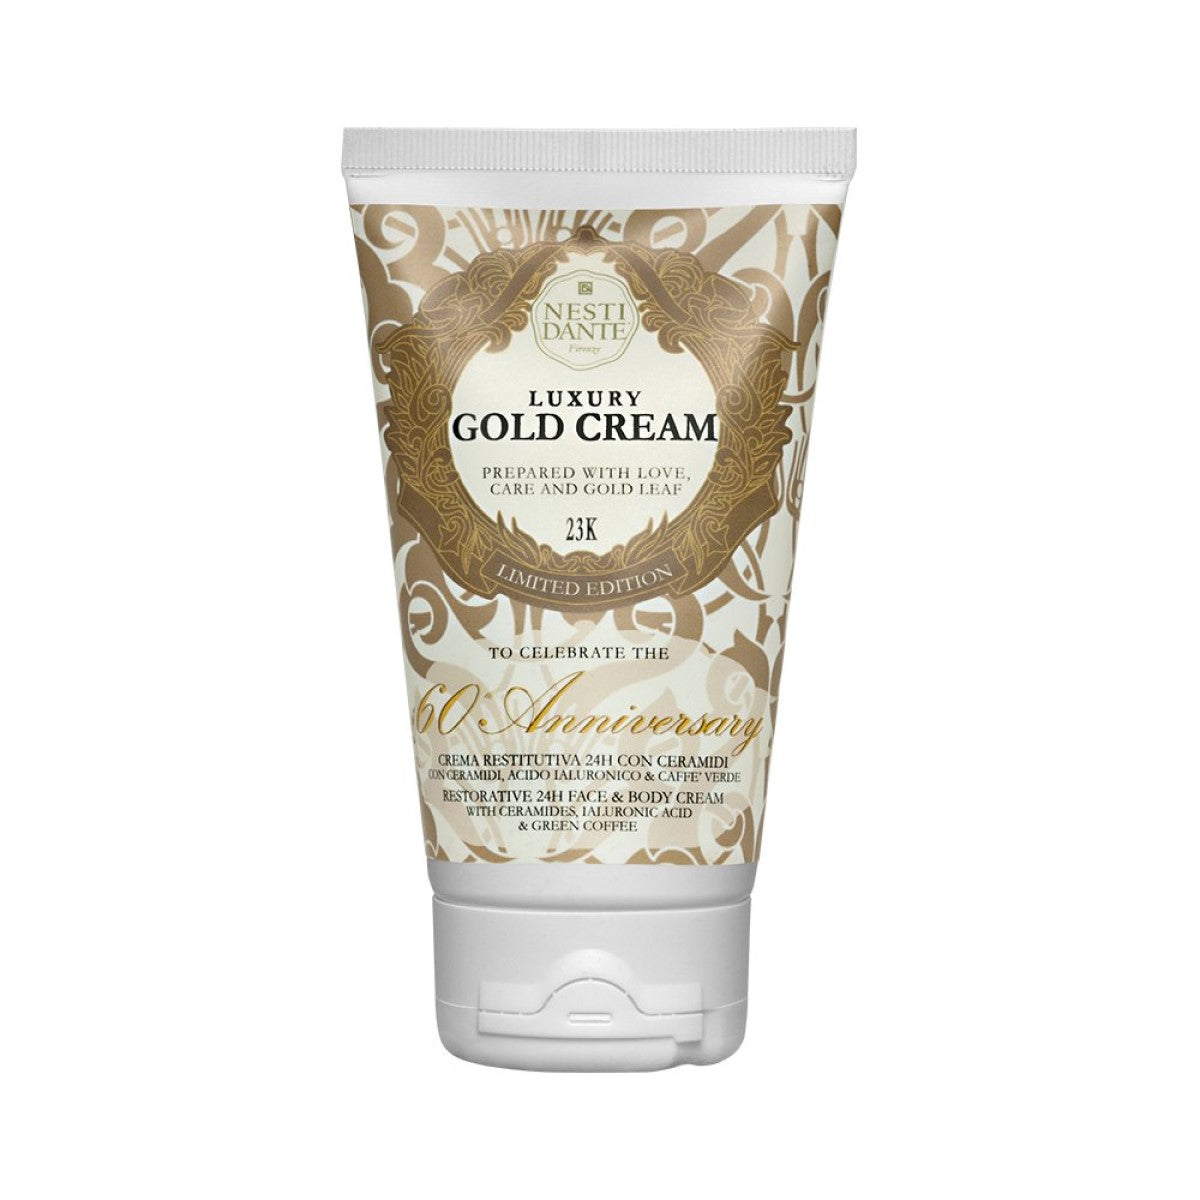 Primary Image of Luxury Gold Face and Body Cream